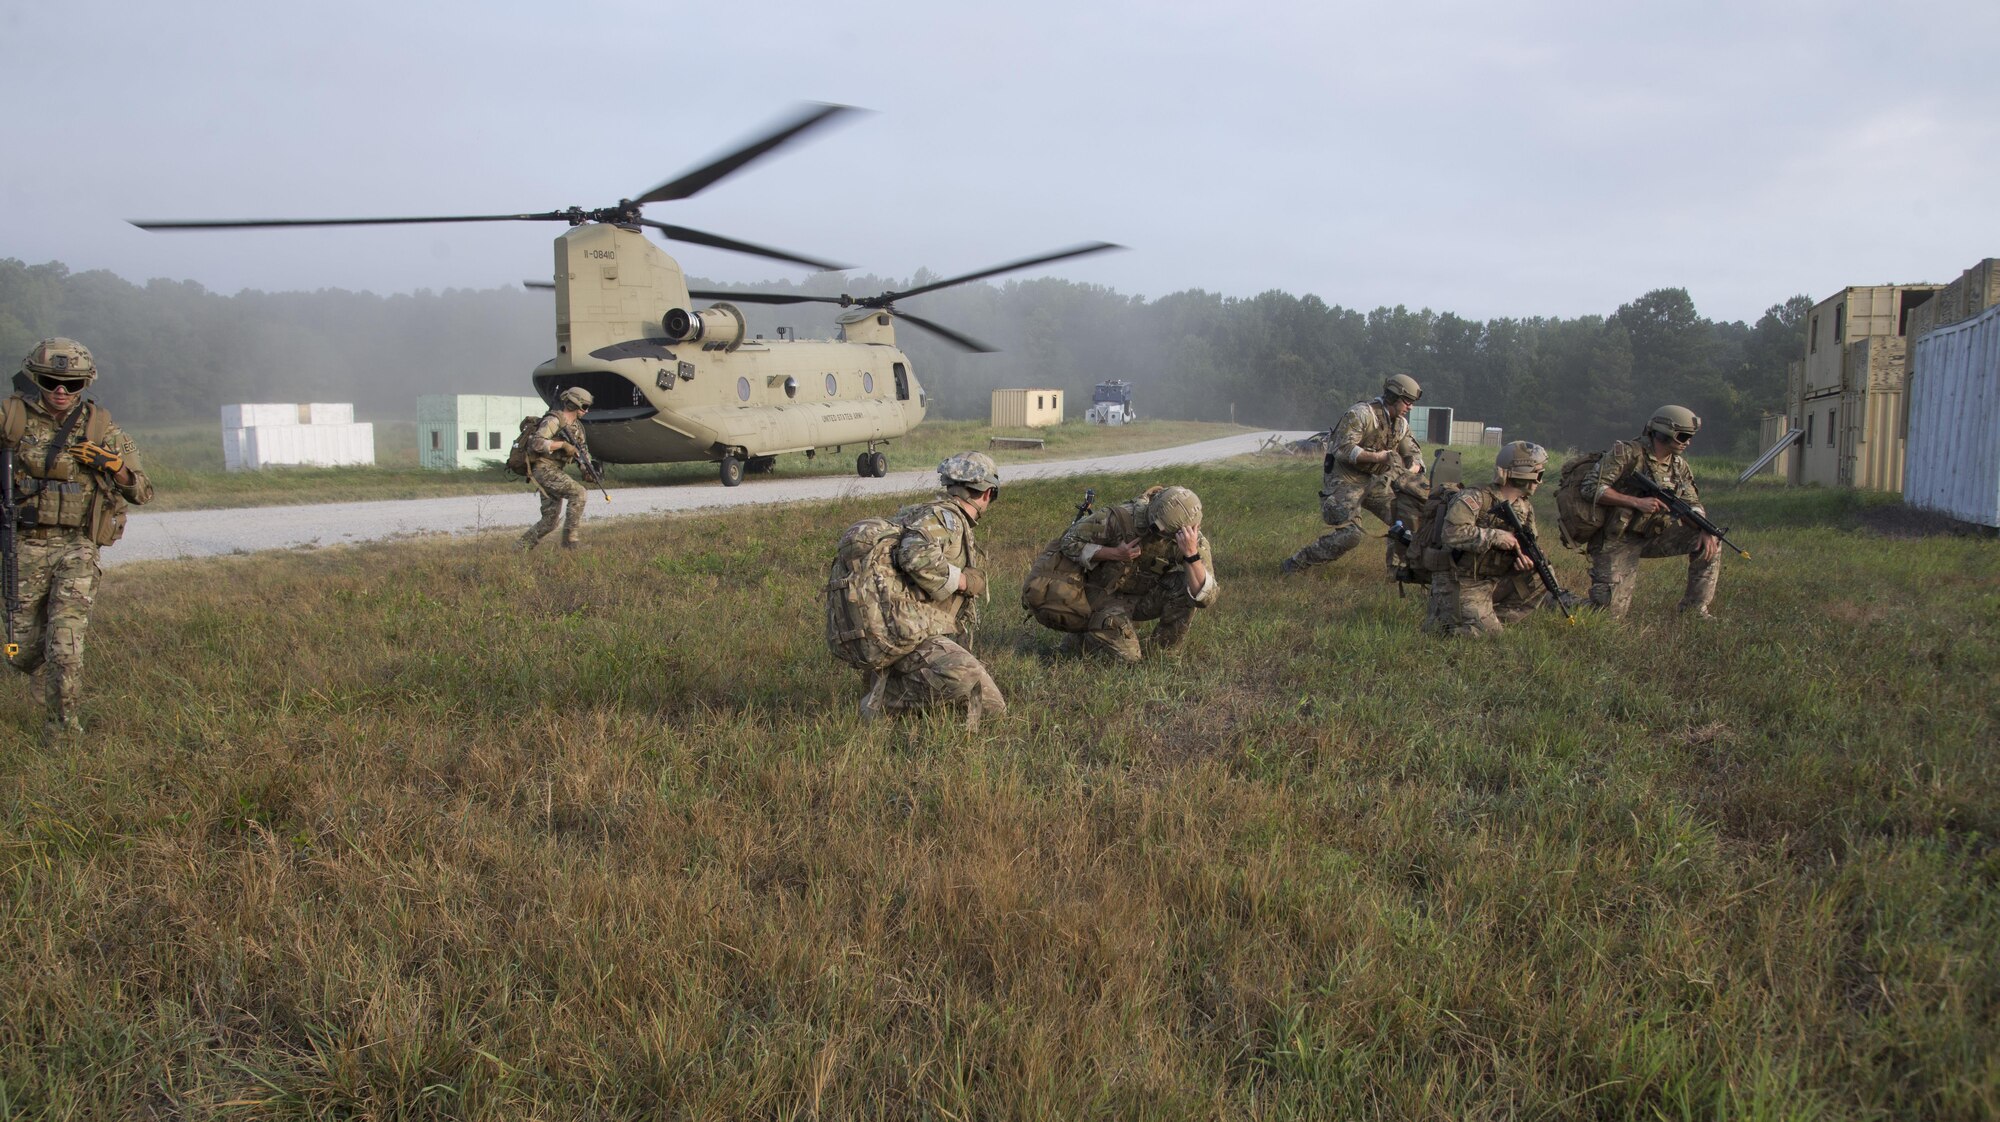 U.S Air Force Airmen assigned to the 633rd Civil Engineer Squadron Explosive Ordinance Disposal team disembark a U.S. Army Chinook helicopter at Fort Pickett, Va., Aug. 31, 2016. The Chinook picked the team up from Langley Air Force Base, Va., then brought them to their training location. (U.S. Air Force photo by Airman First Class Enrique Barcelo)